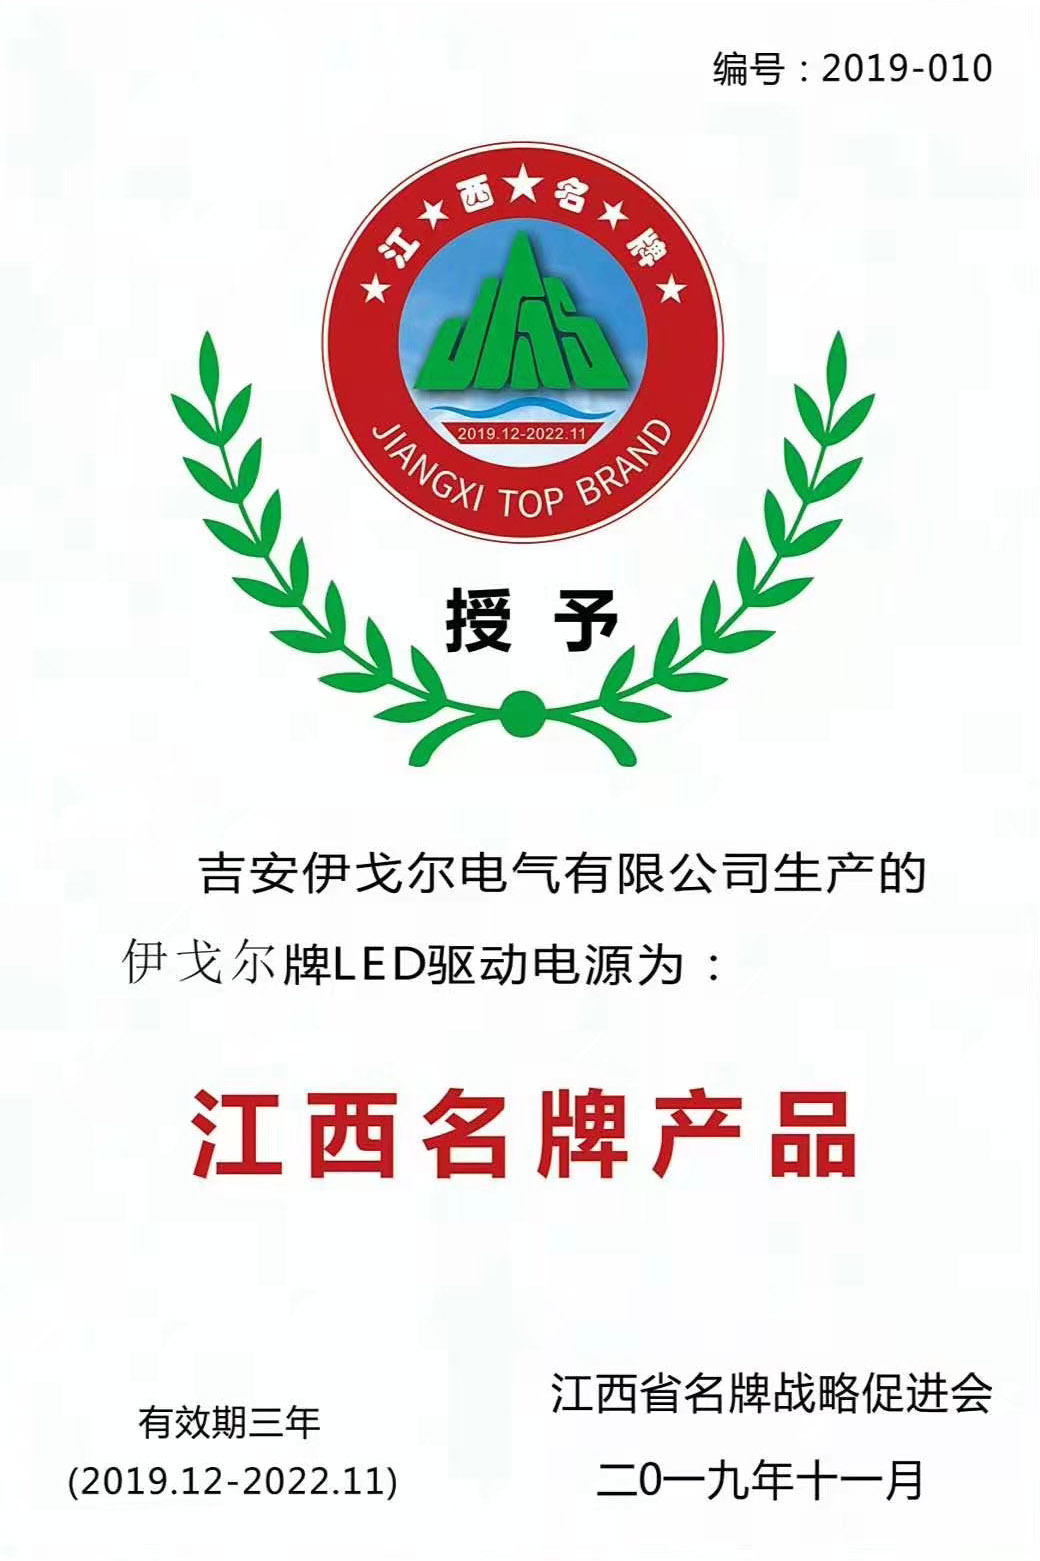 Good news! Eaglerise LED drive power product won the title of "JIANGXI TOP BRAND"